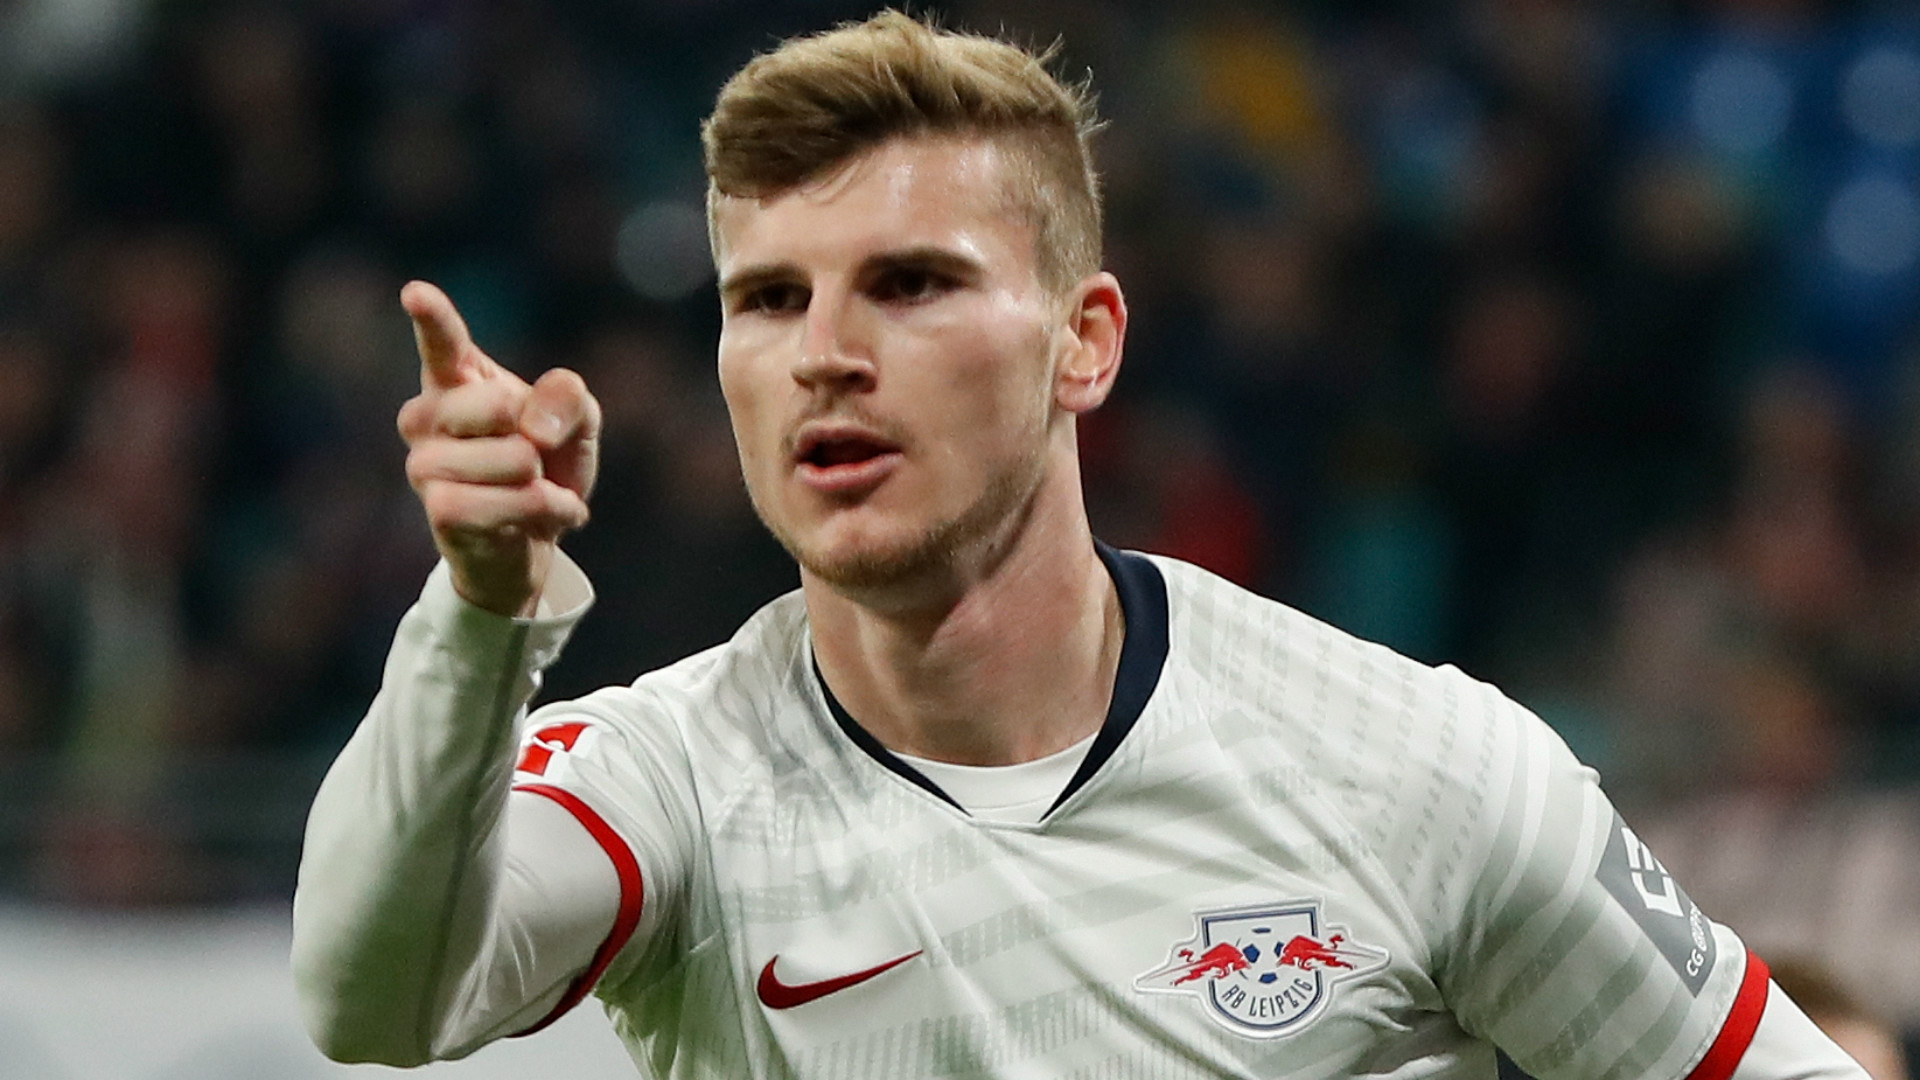 Timo Werner was in attendence as Chelsea defeated Wolverhampton Wanderers to secure Champions League qualification